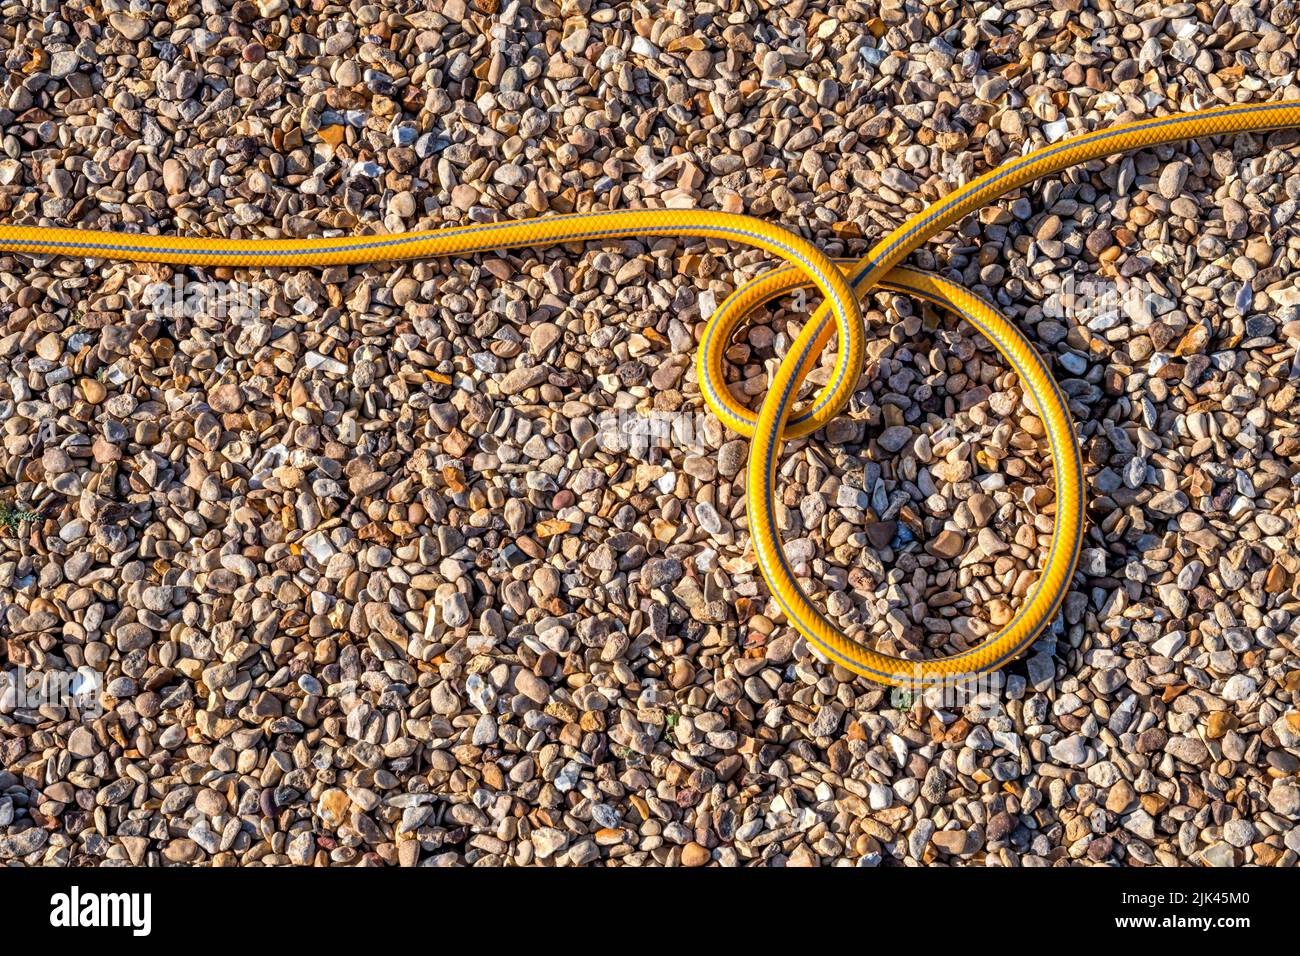 Coils of a garden hosepipe on a gravel drive. Stock Photo